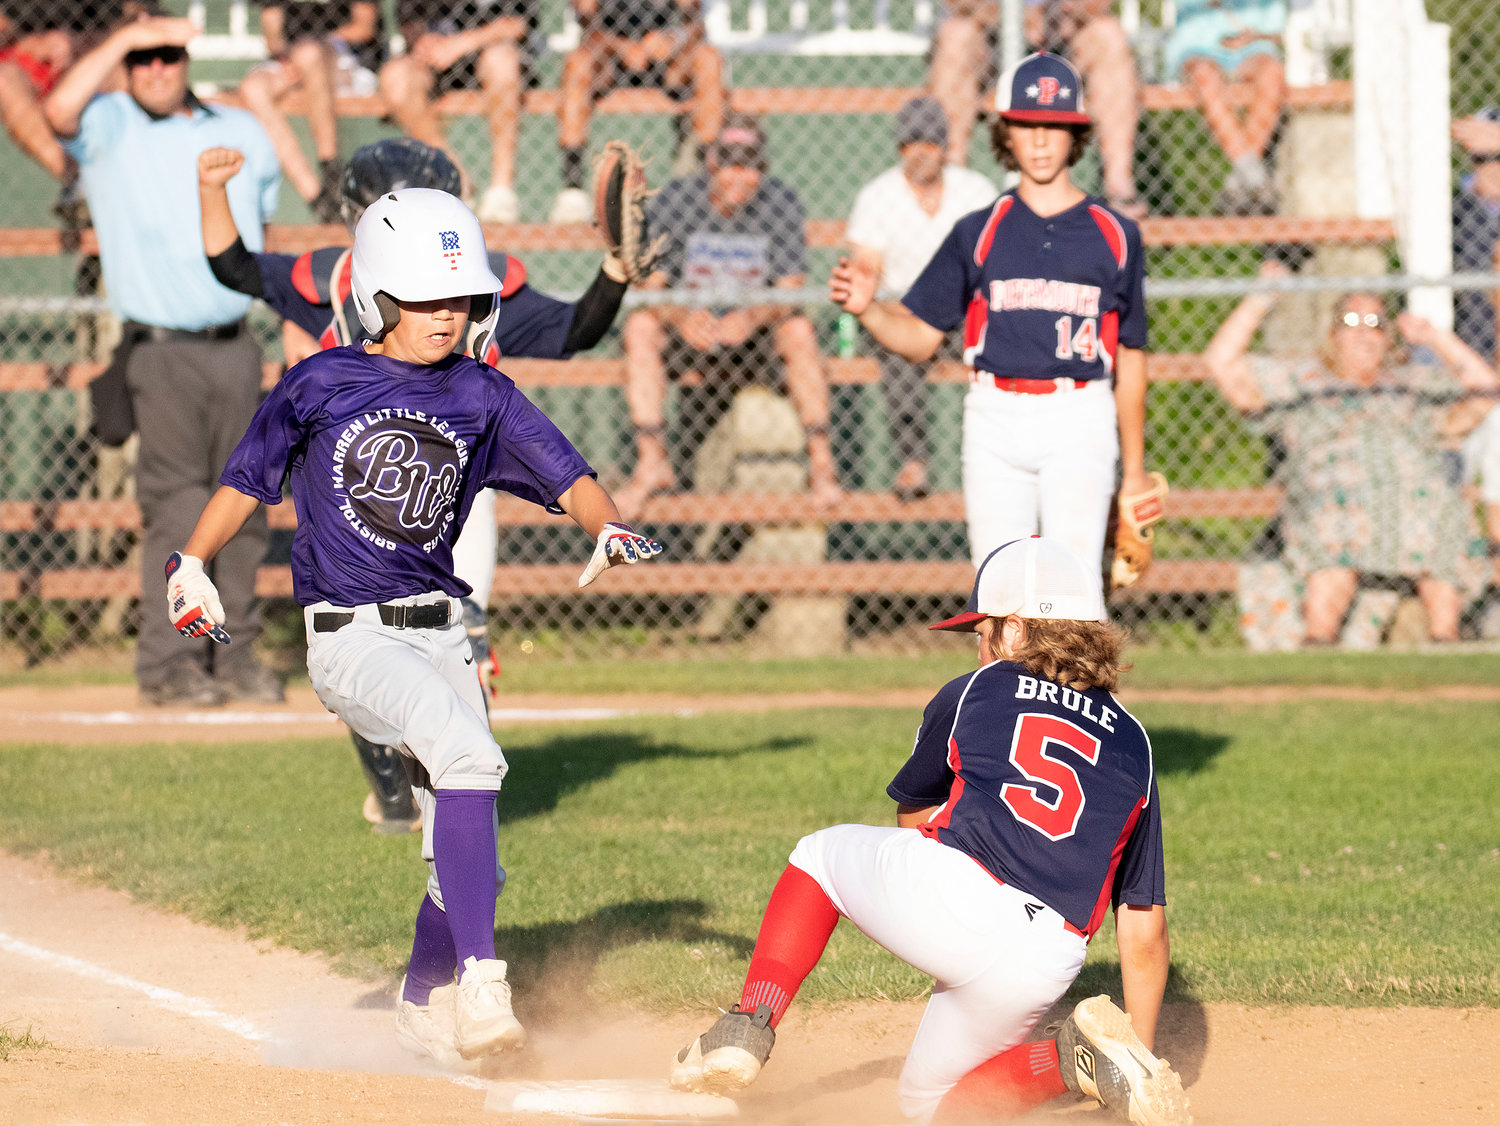 Second baseman Kane Brule (right) gets his foot on the bag before Bristol-Warren’s Reed Dubois (left) after he laid down a bunt to lead off the fifth inning.